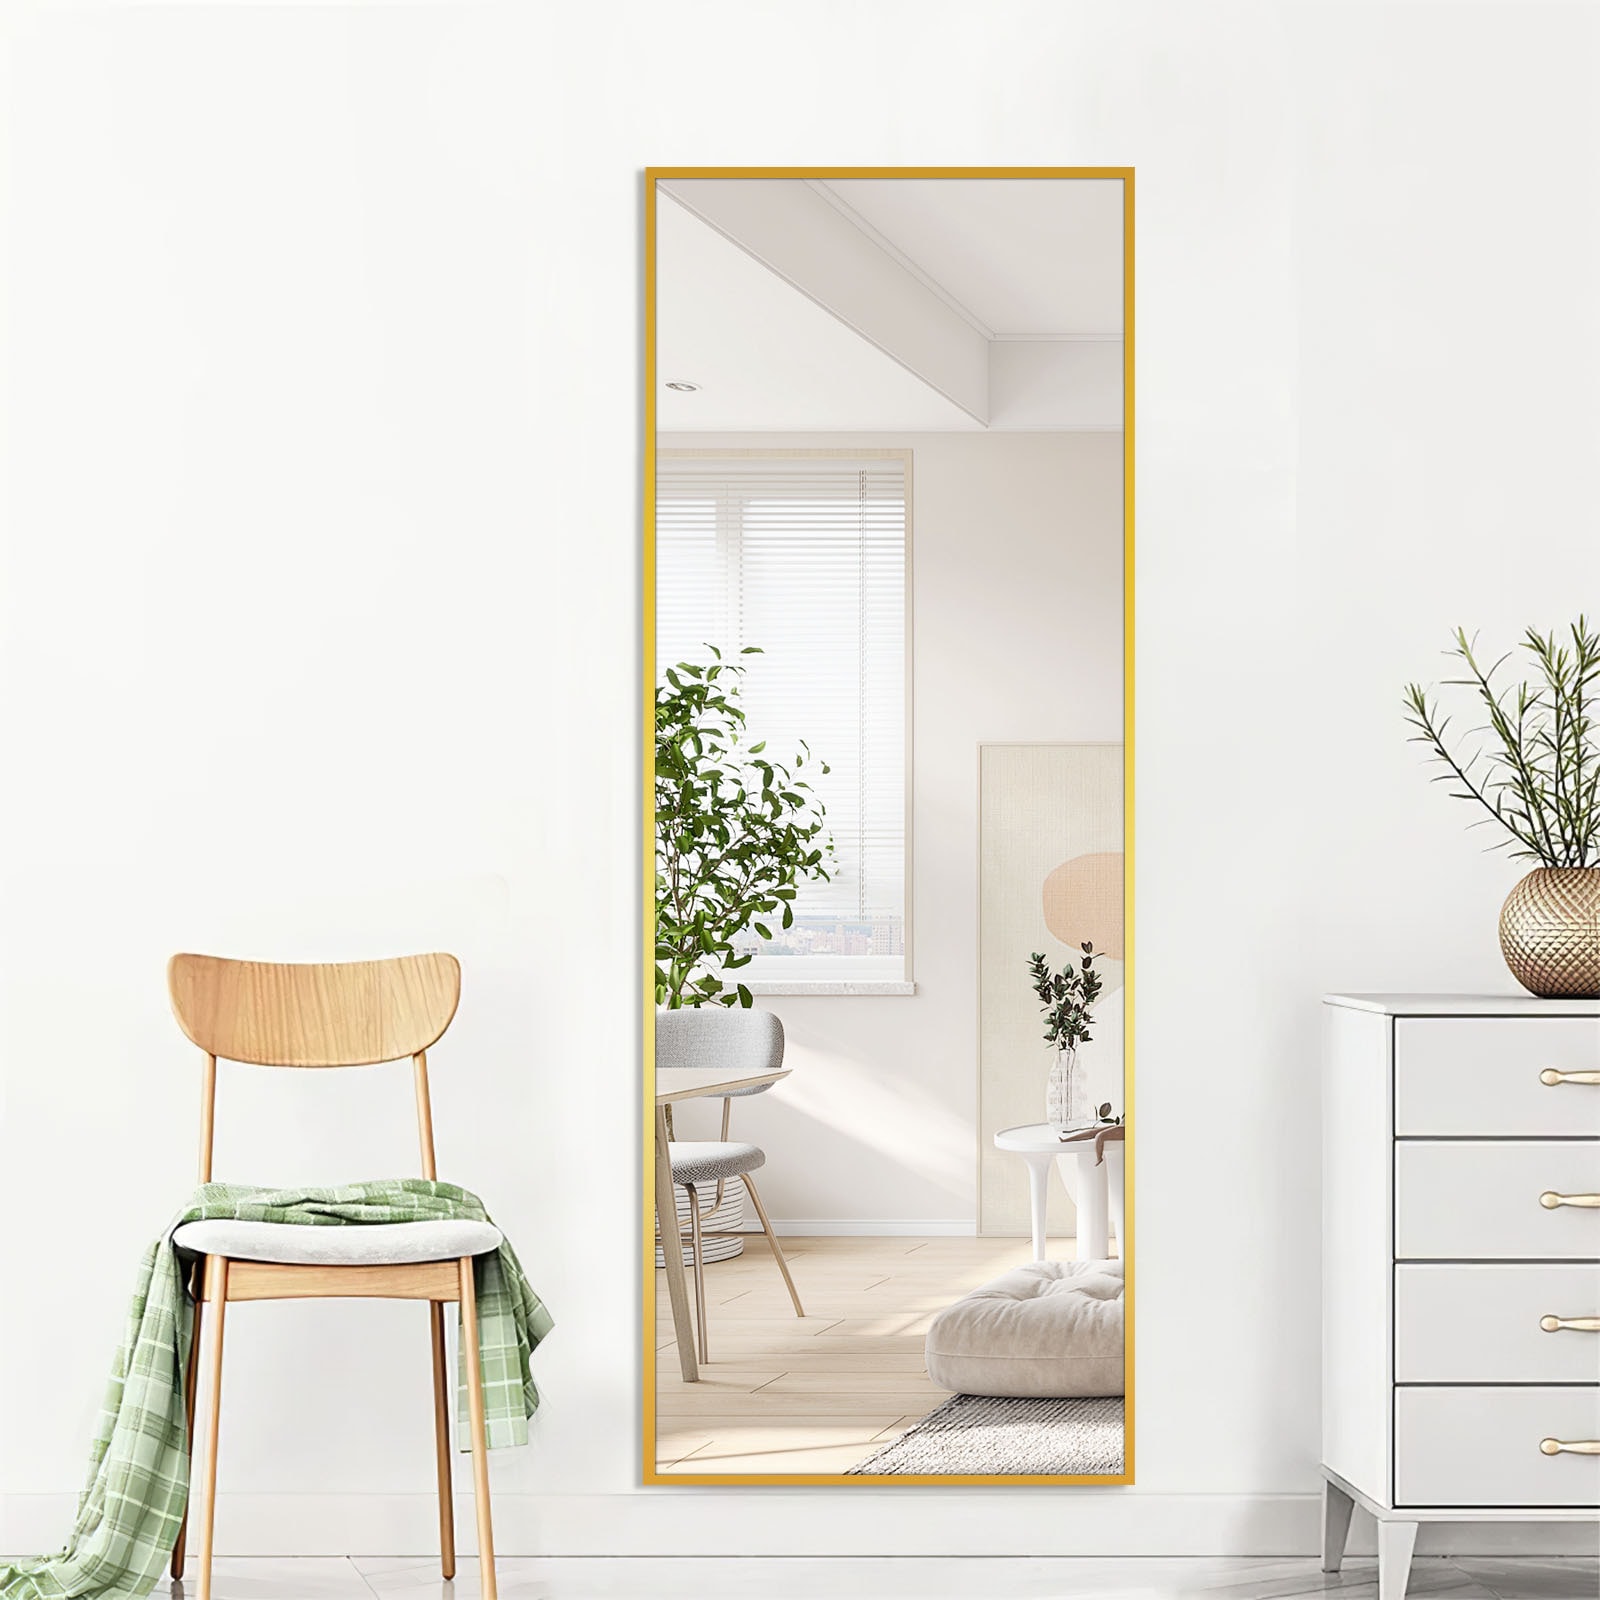 NeuType 16-in W x 51-in H Gold Framed Full Length Floor Mirror at Lowes.com